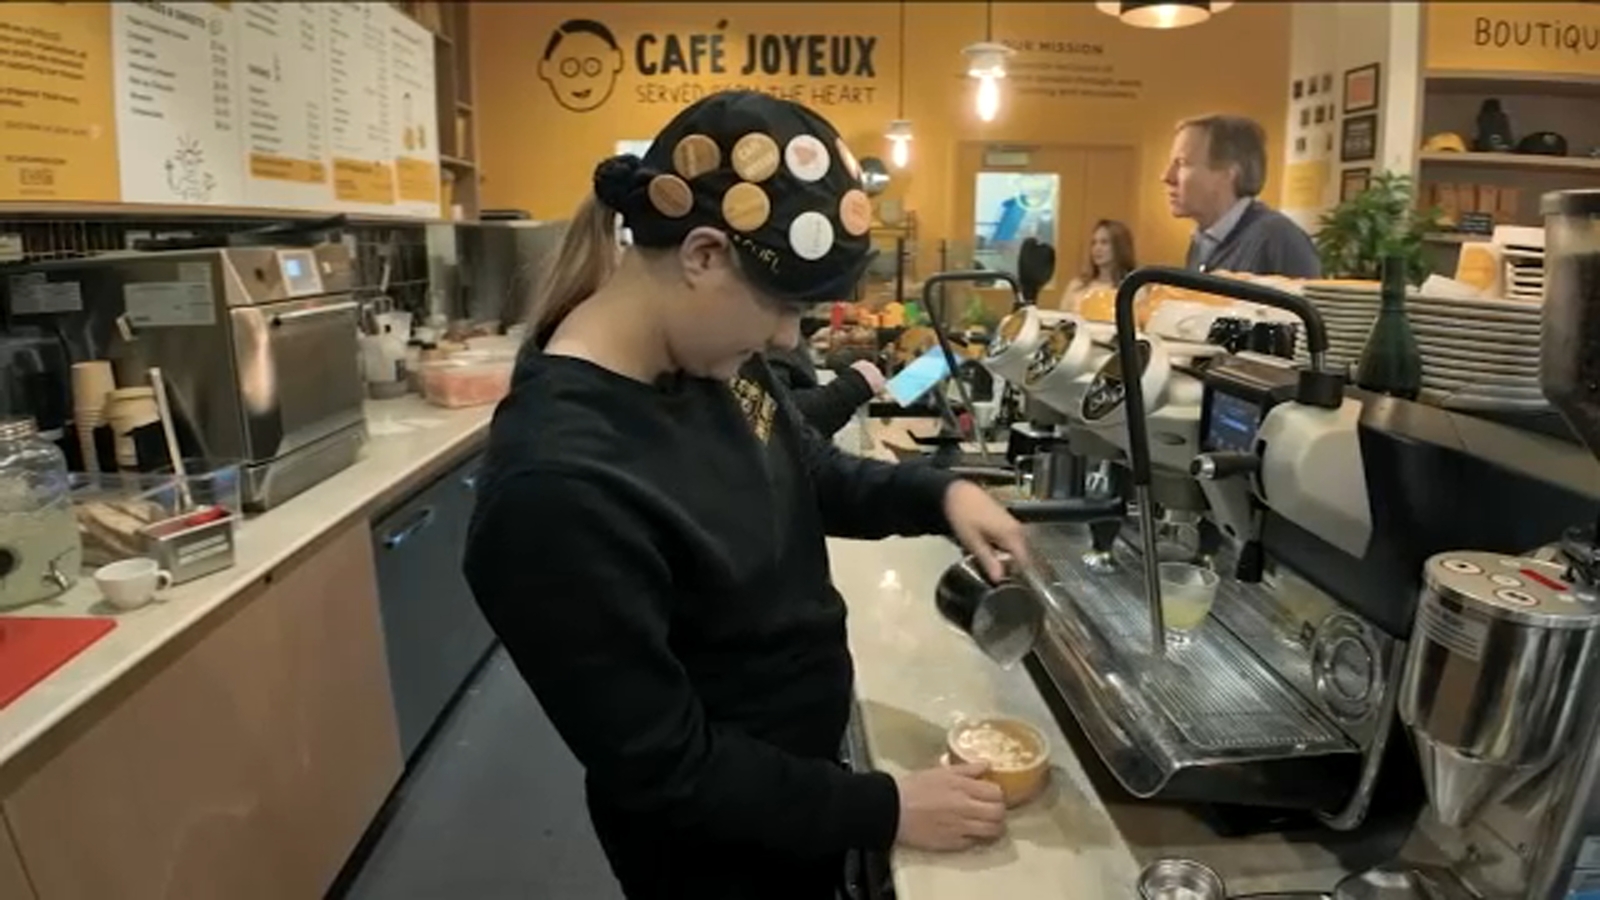 NYC Cafe Joyeux promotes inclusion by employing and empowering disabled workers [Video]